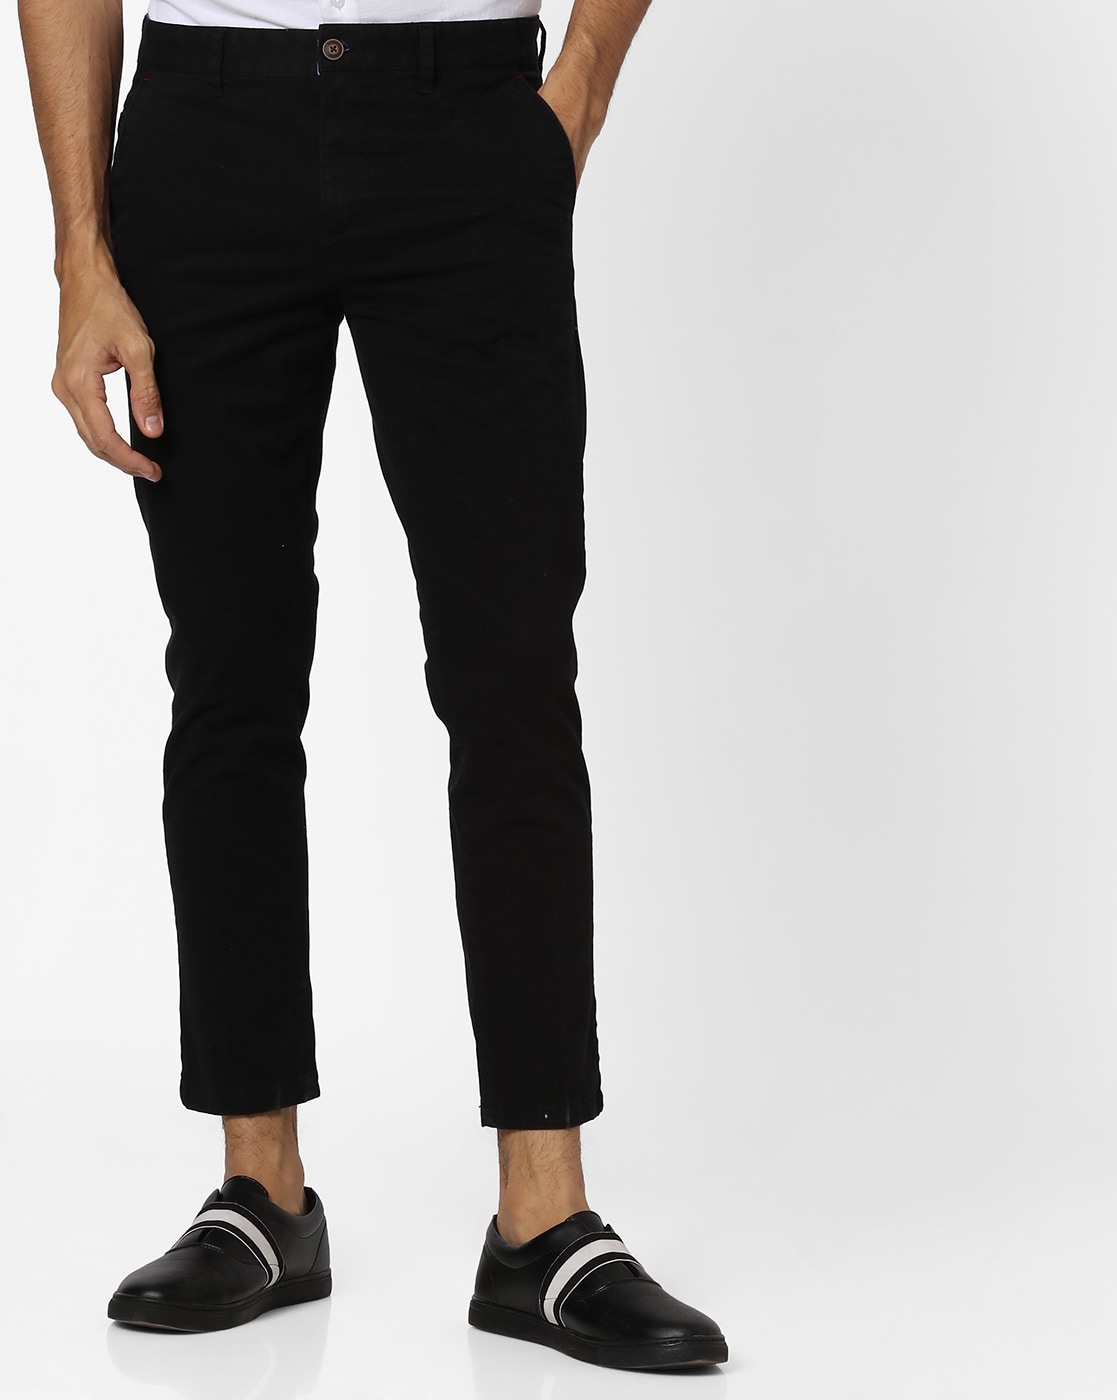 ankle length pant for boys